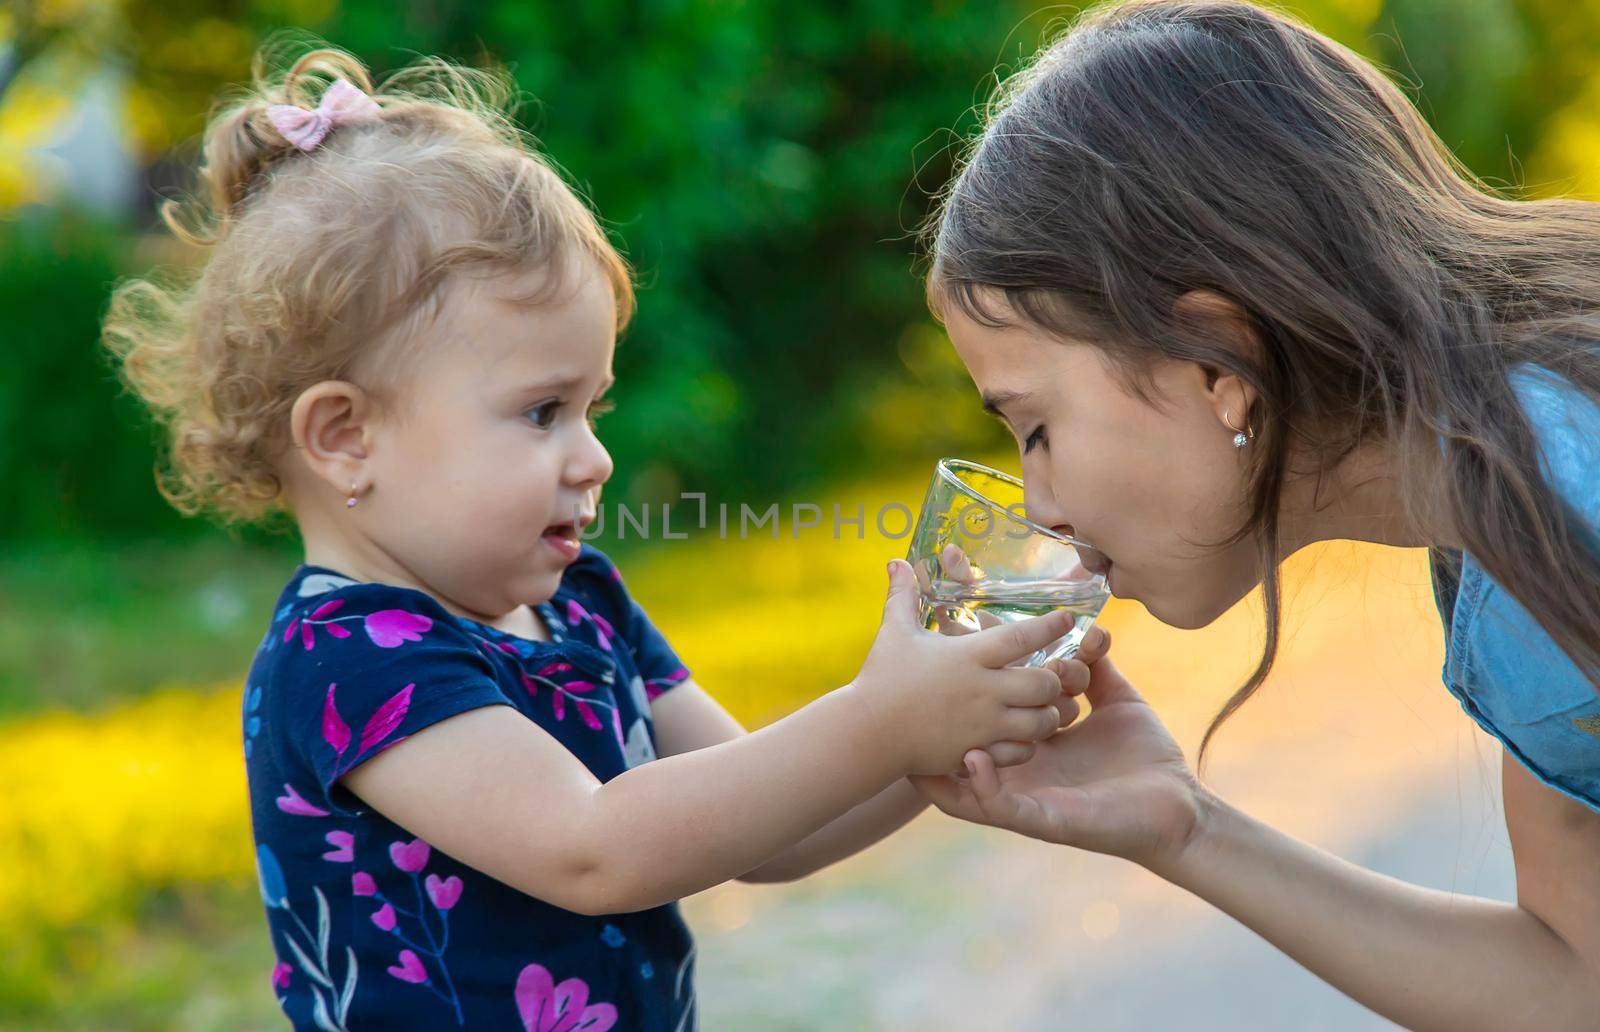 The child drinks water from a glass. Selective focus. Kid.